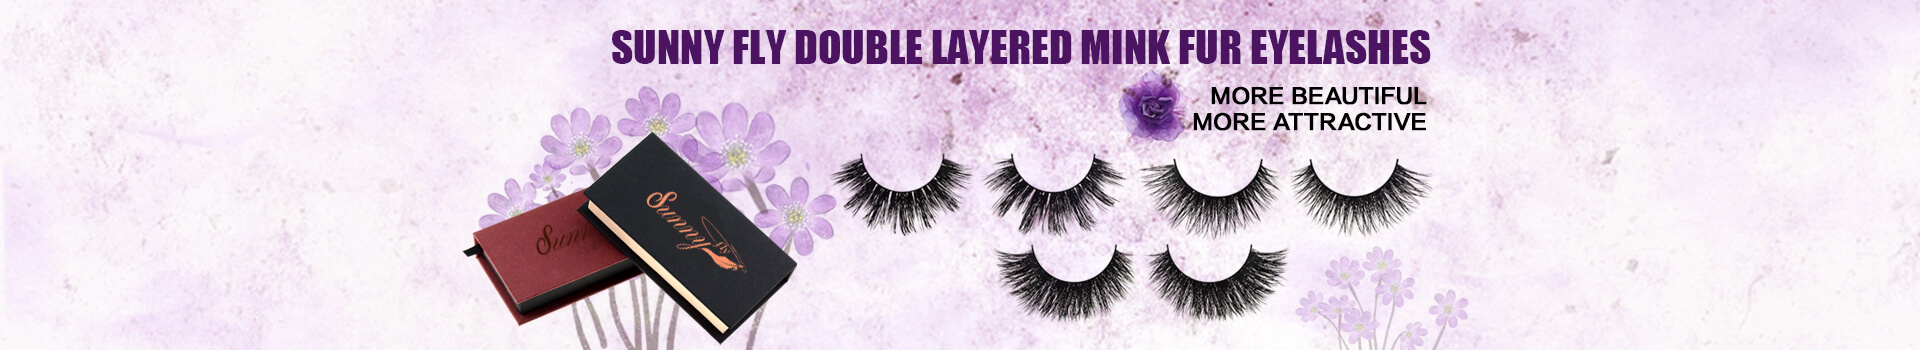 Double Layered Nerz Wimpern MD01